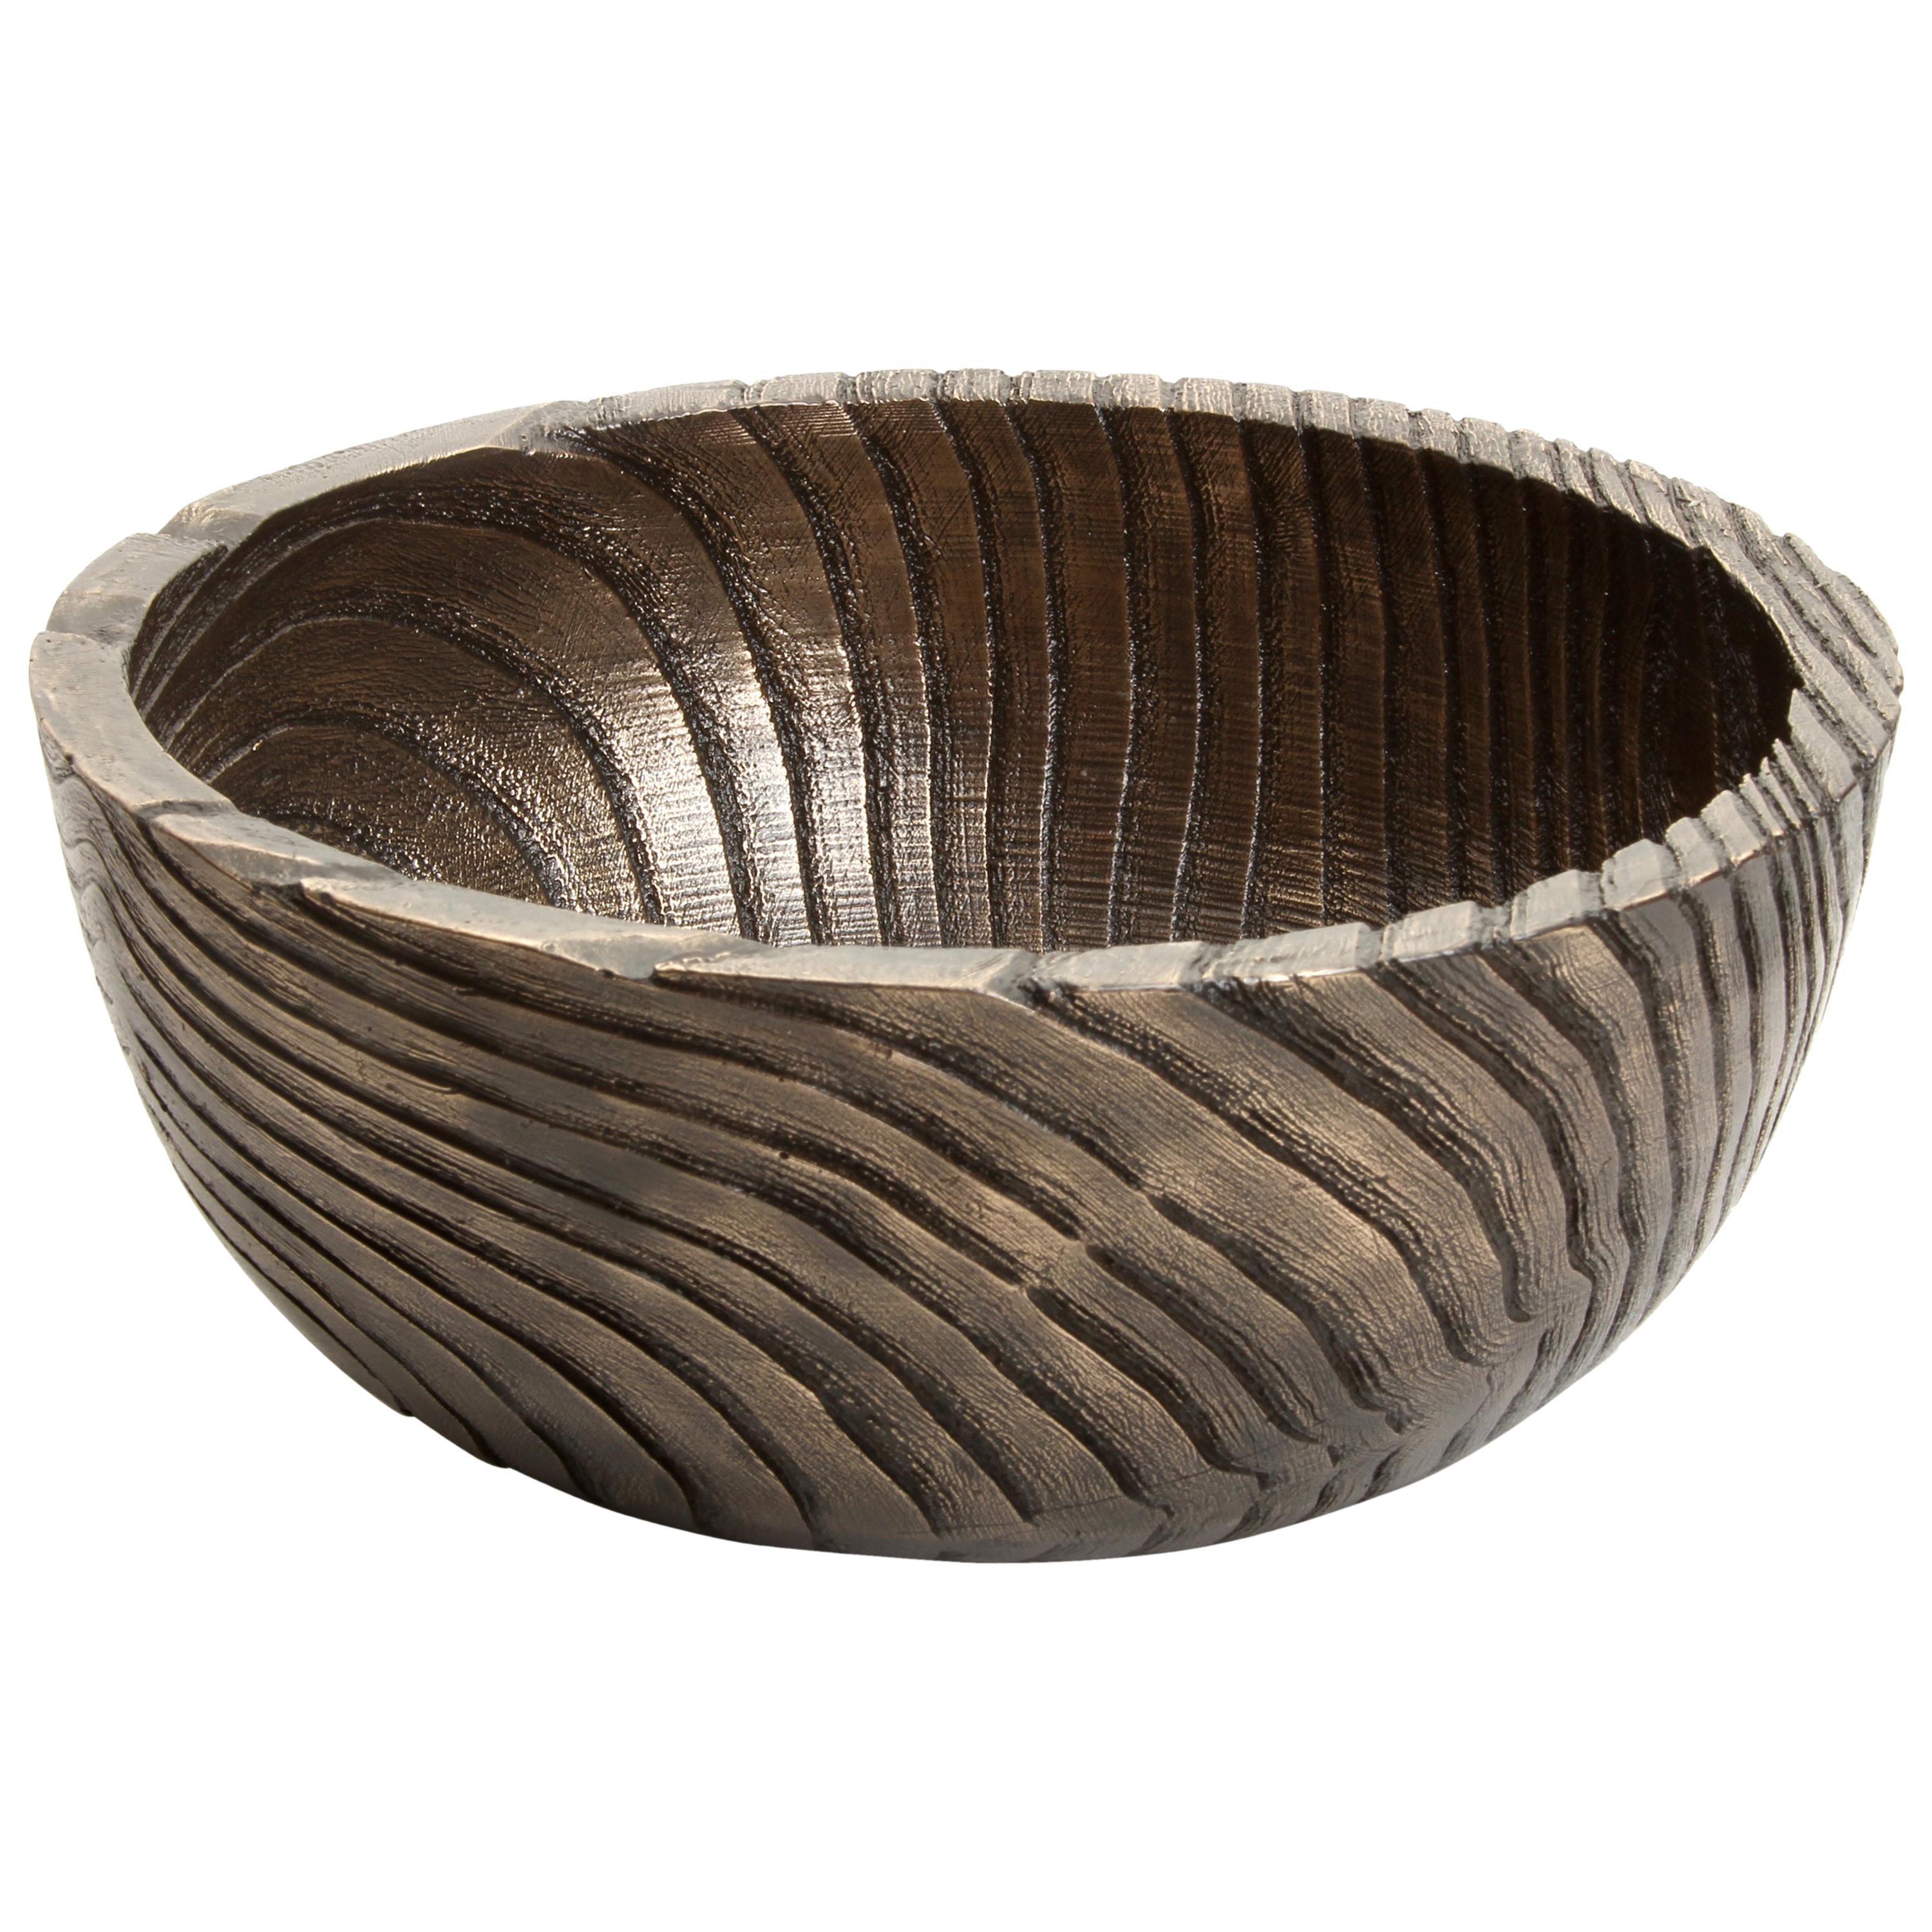 Solid Bronze "Alpine" Vessel or Bowl with Wood Texture and Blackened Patina For Sale